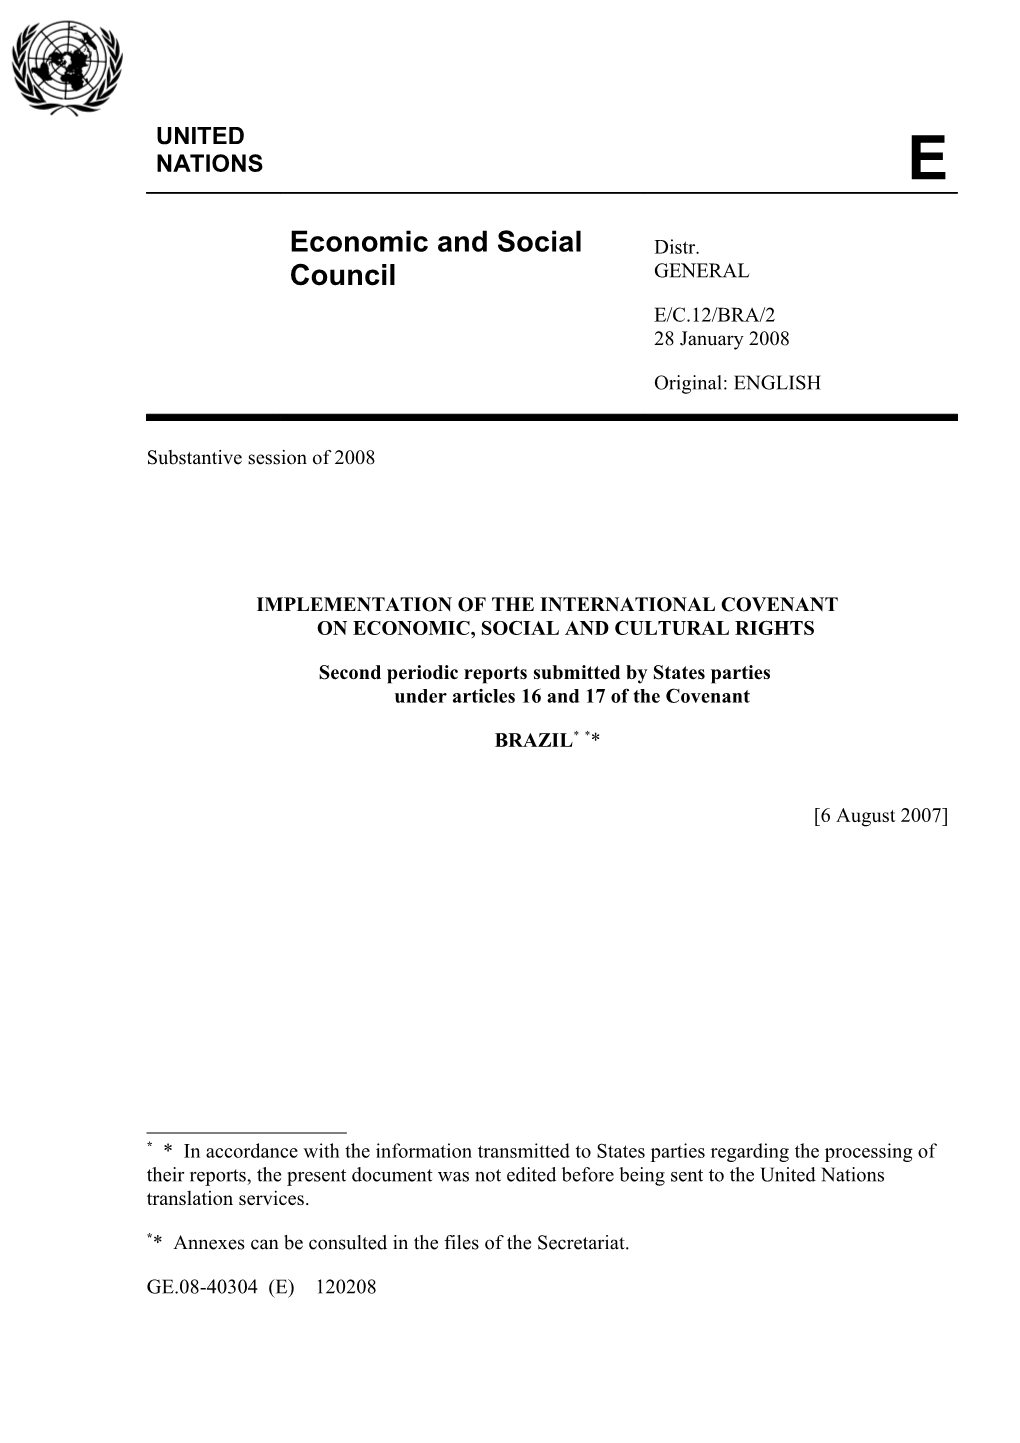 Implementation of the International Covenanton Economic, Social and Cultural Rights s1